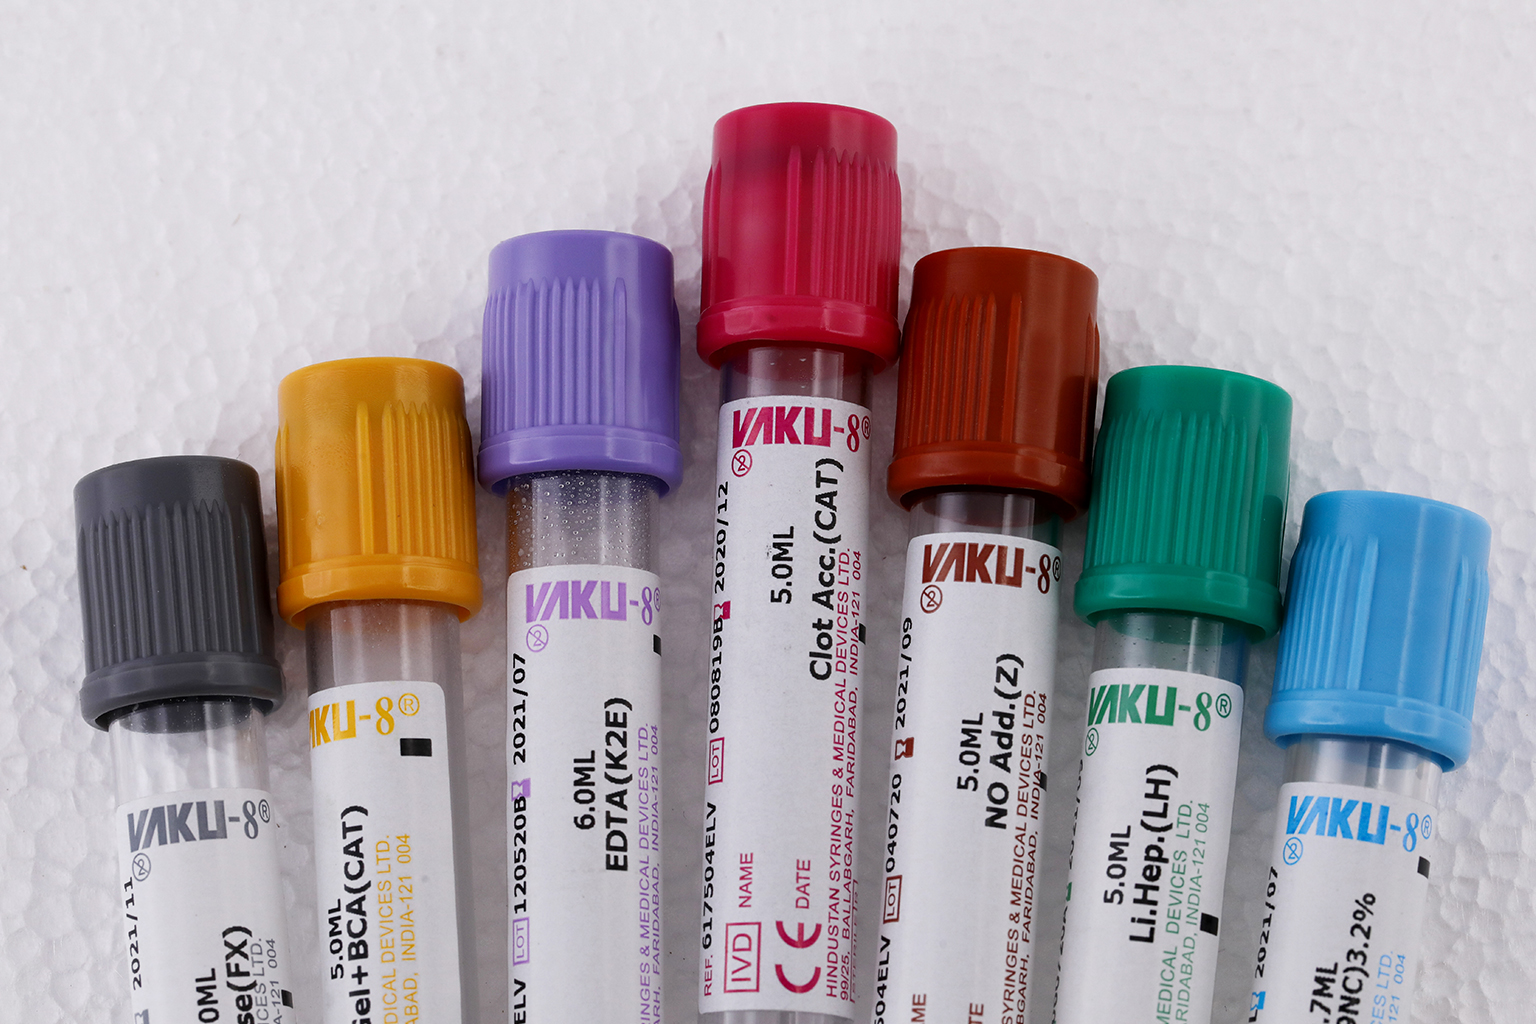 phlebotomy tube colors and tests chart - Luciano Deaton